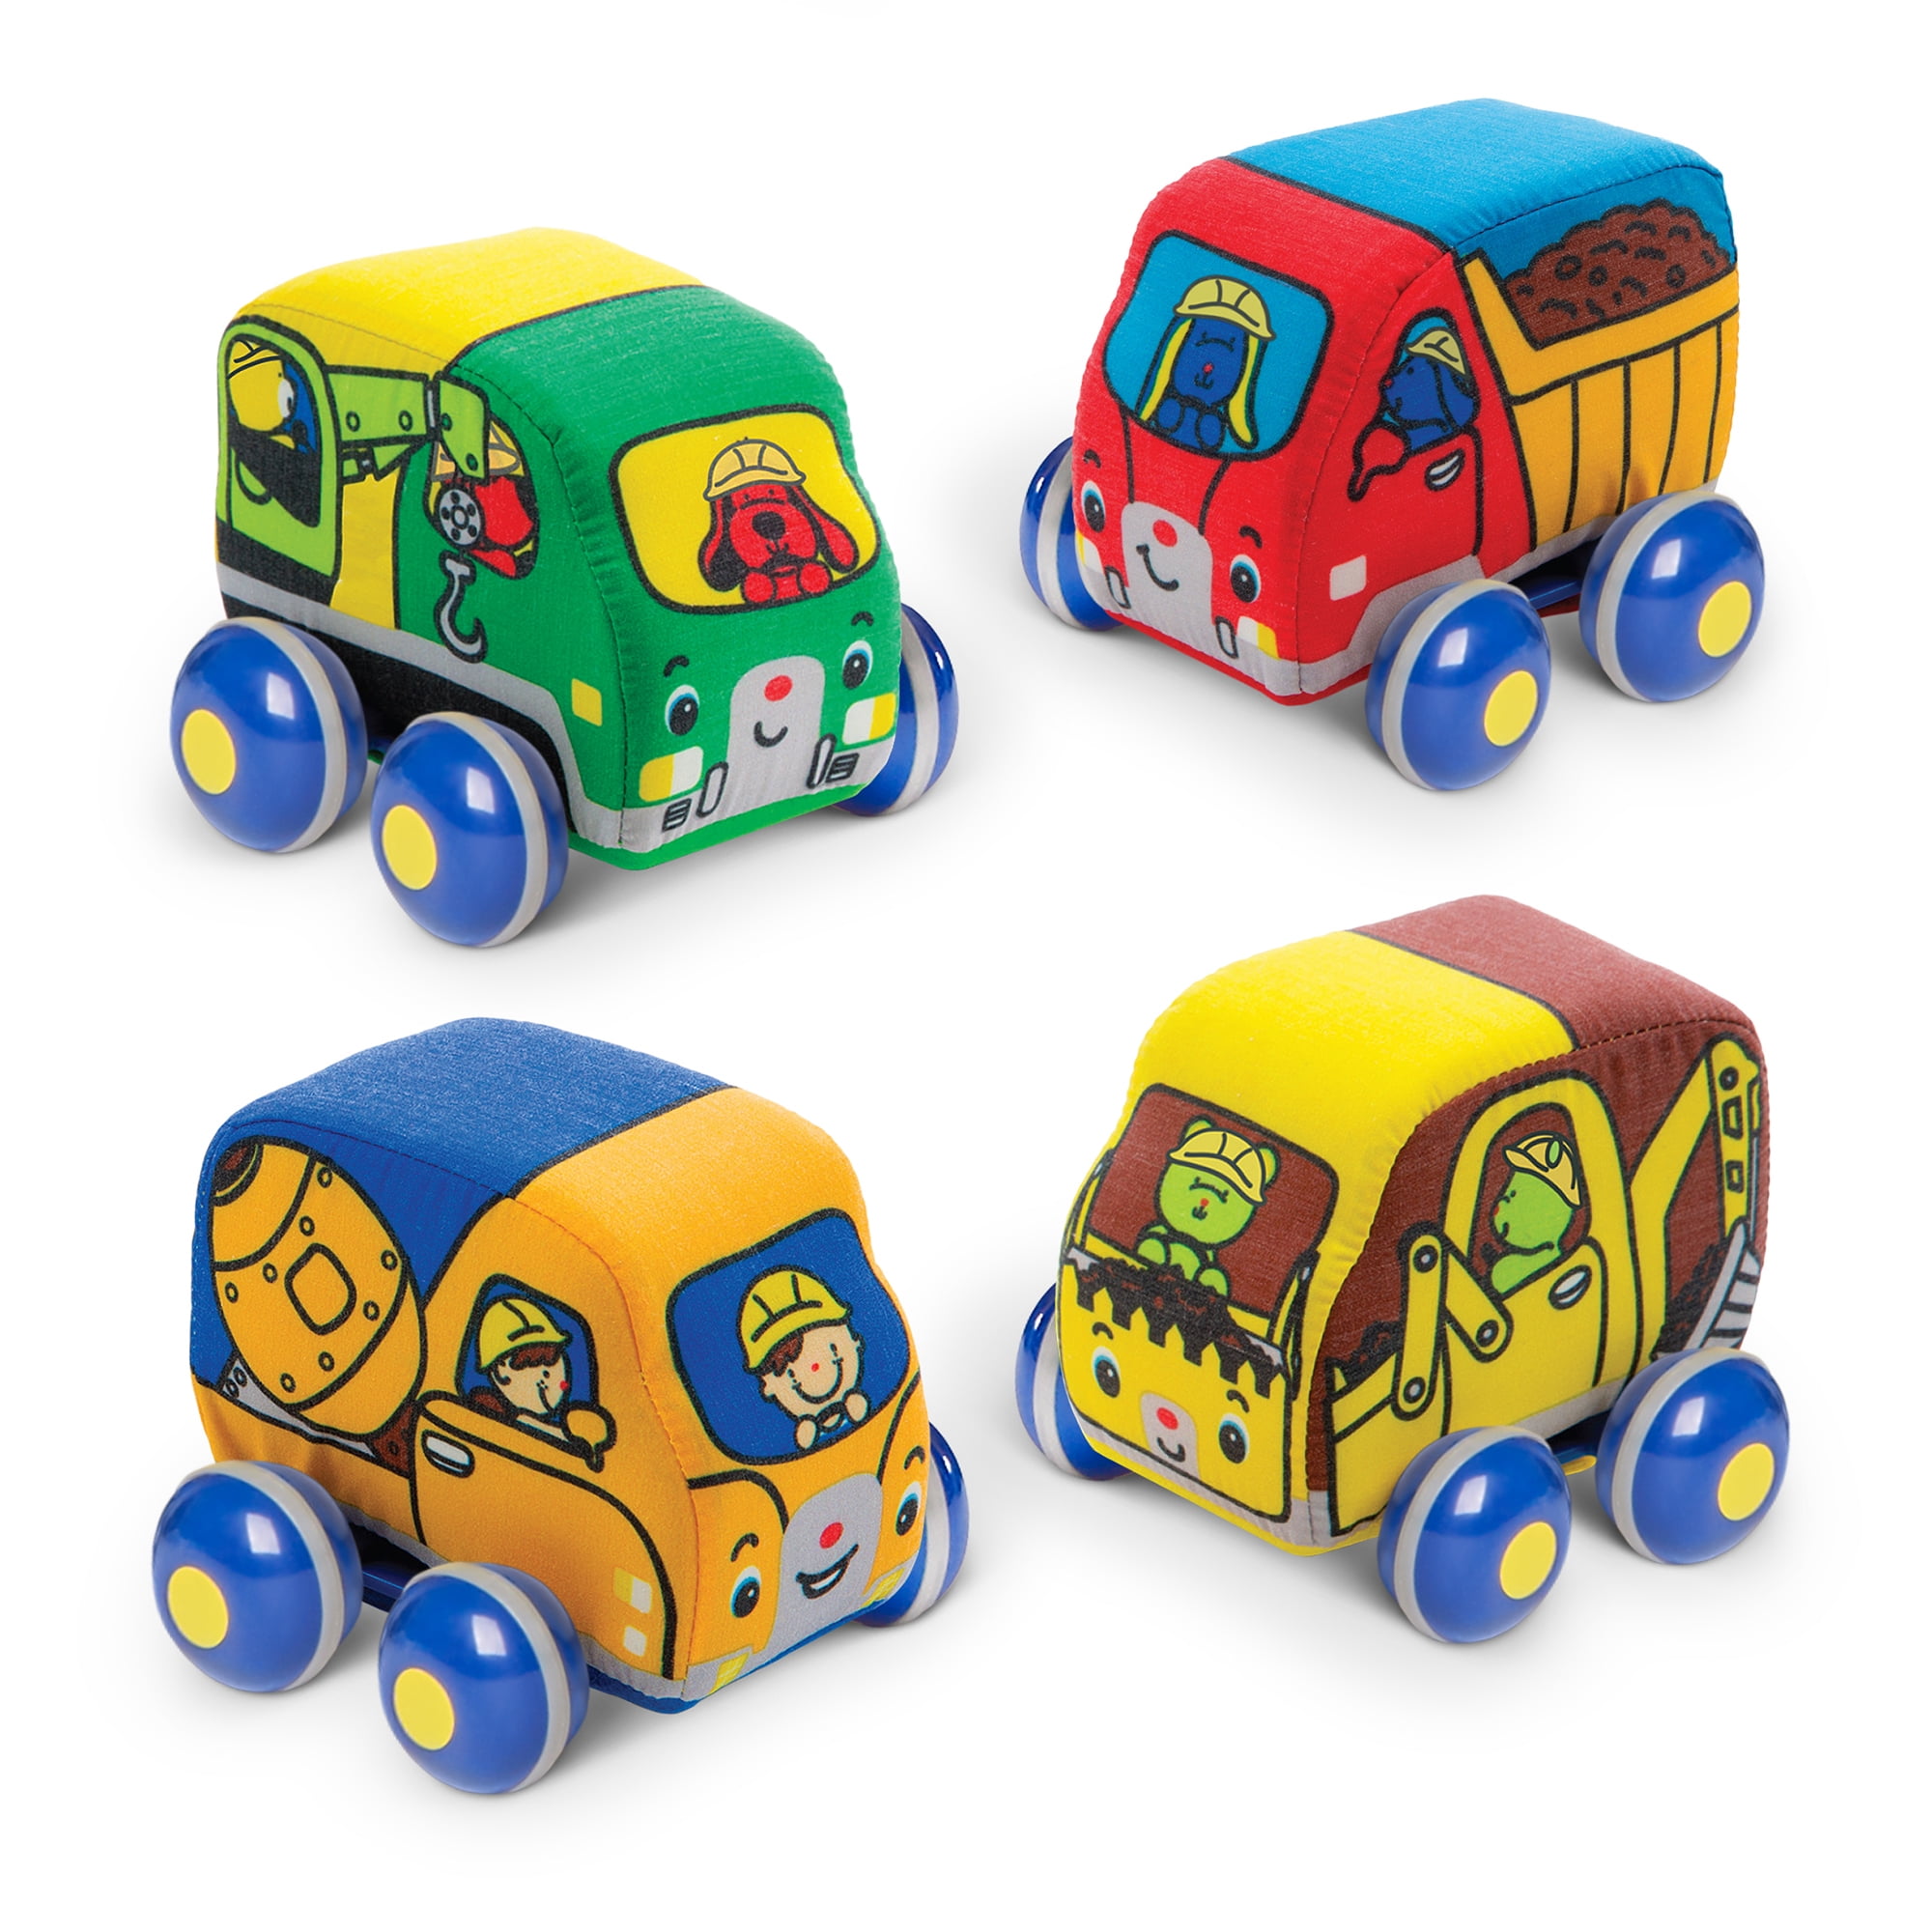 Melissa & Doug Shape-sorting Wooden Dump Truck Toy With 9 Colorful Shapes and 2 for sale online 